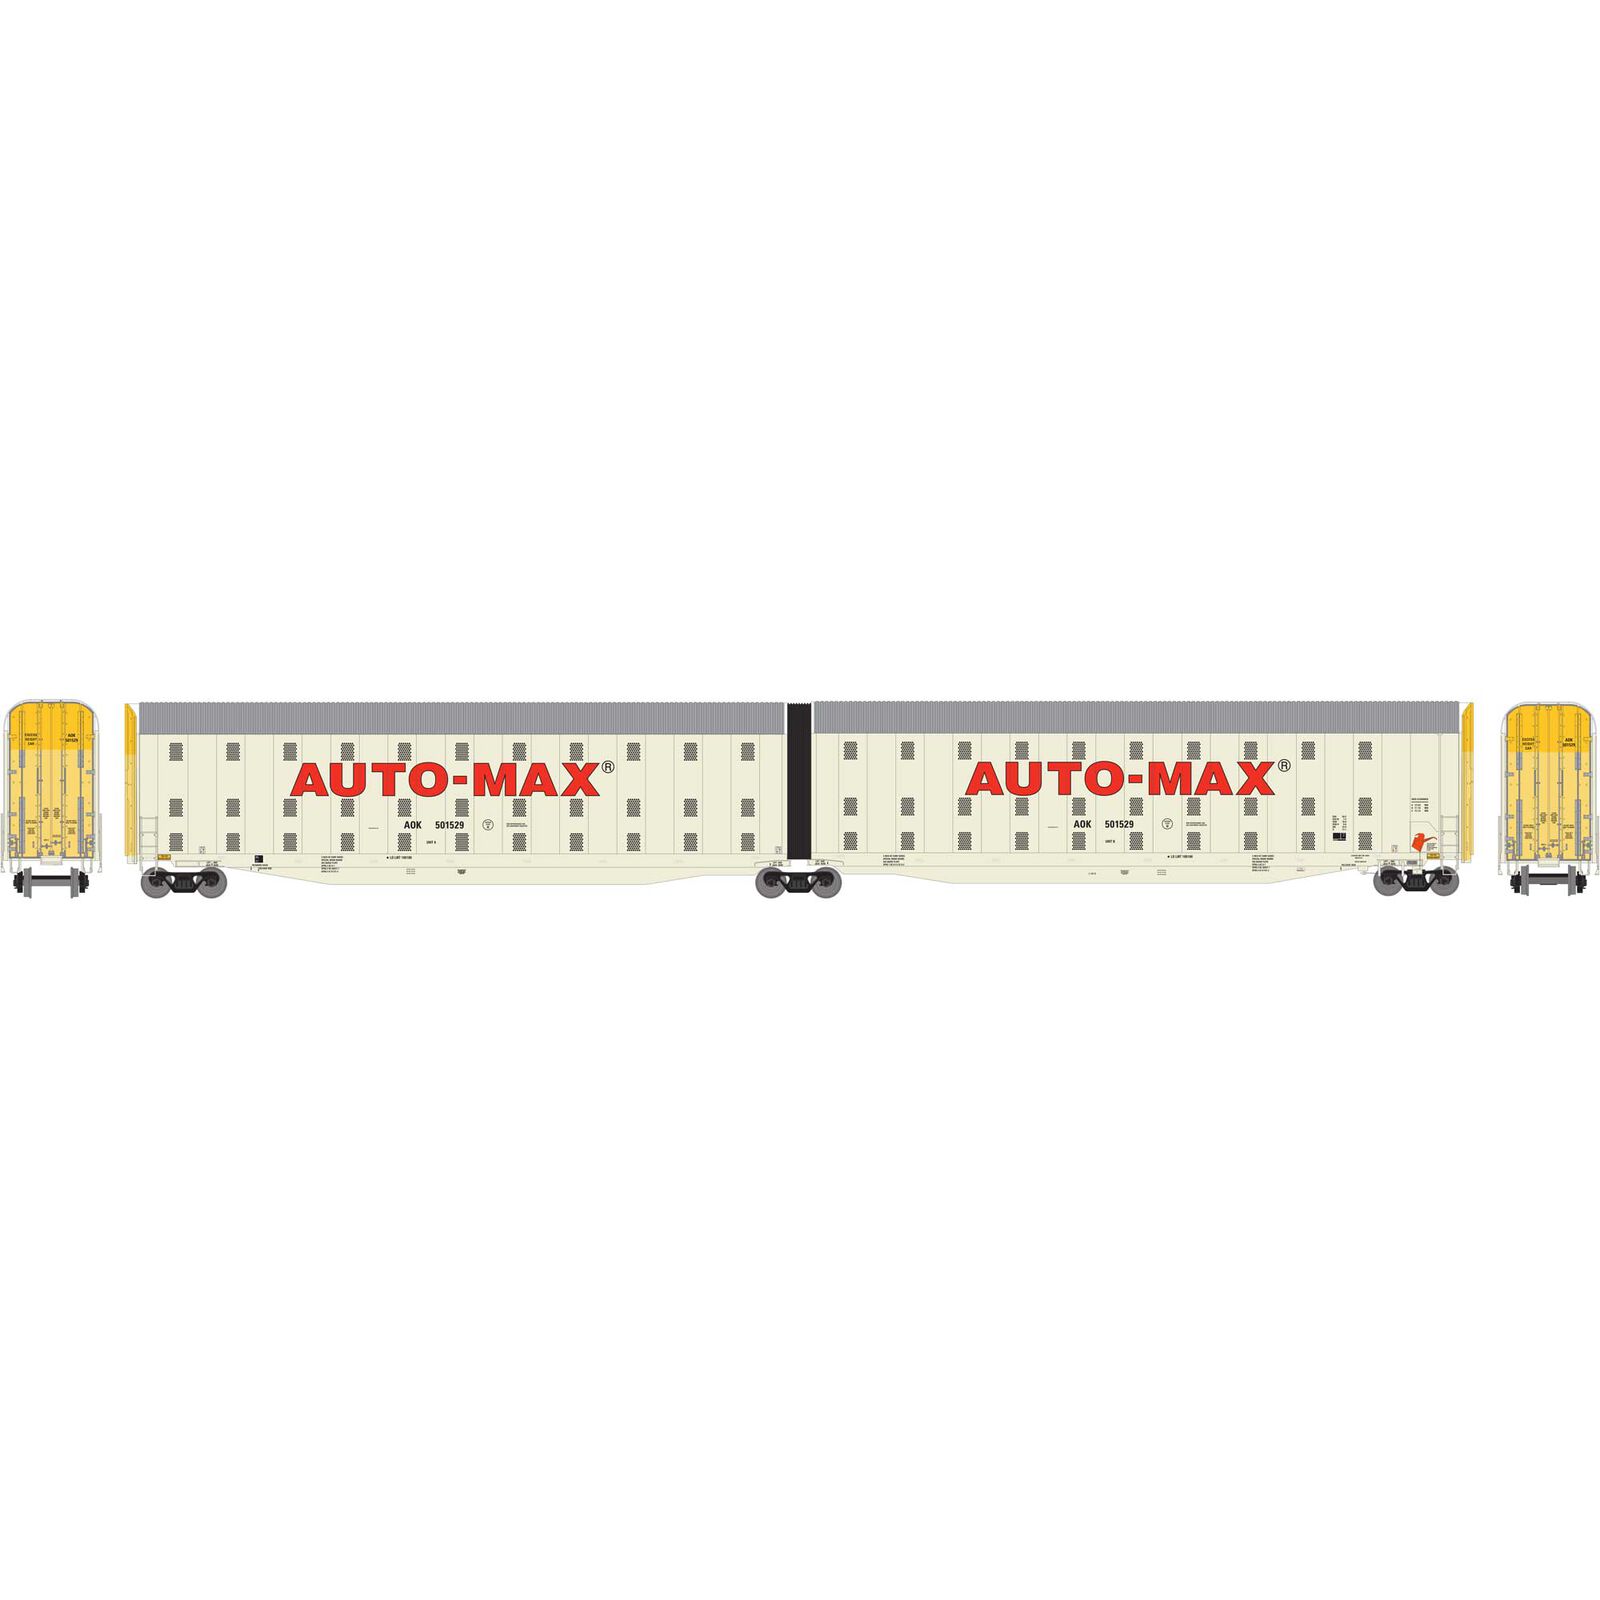 N Auto-Max Auto Carrier AOK #501529